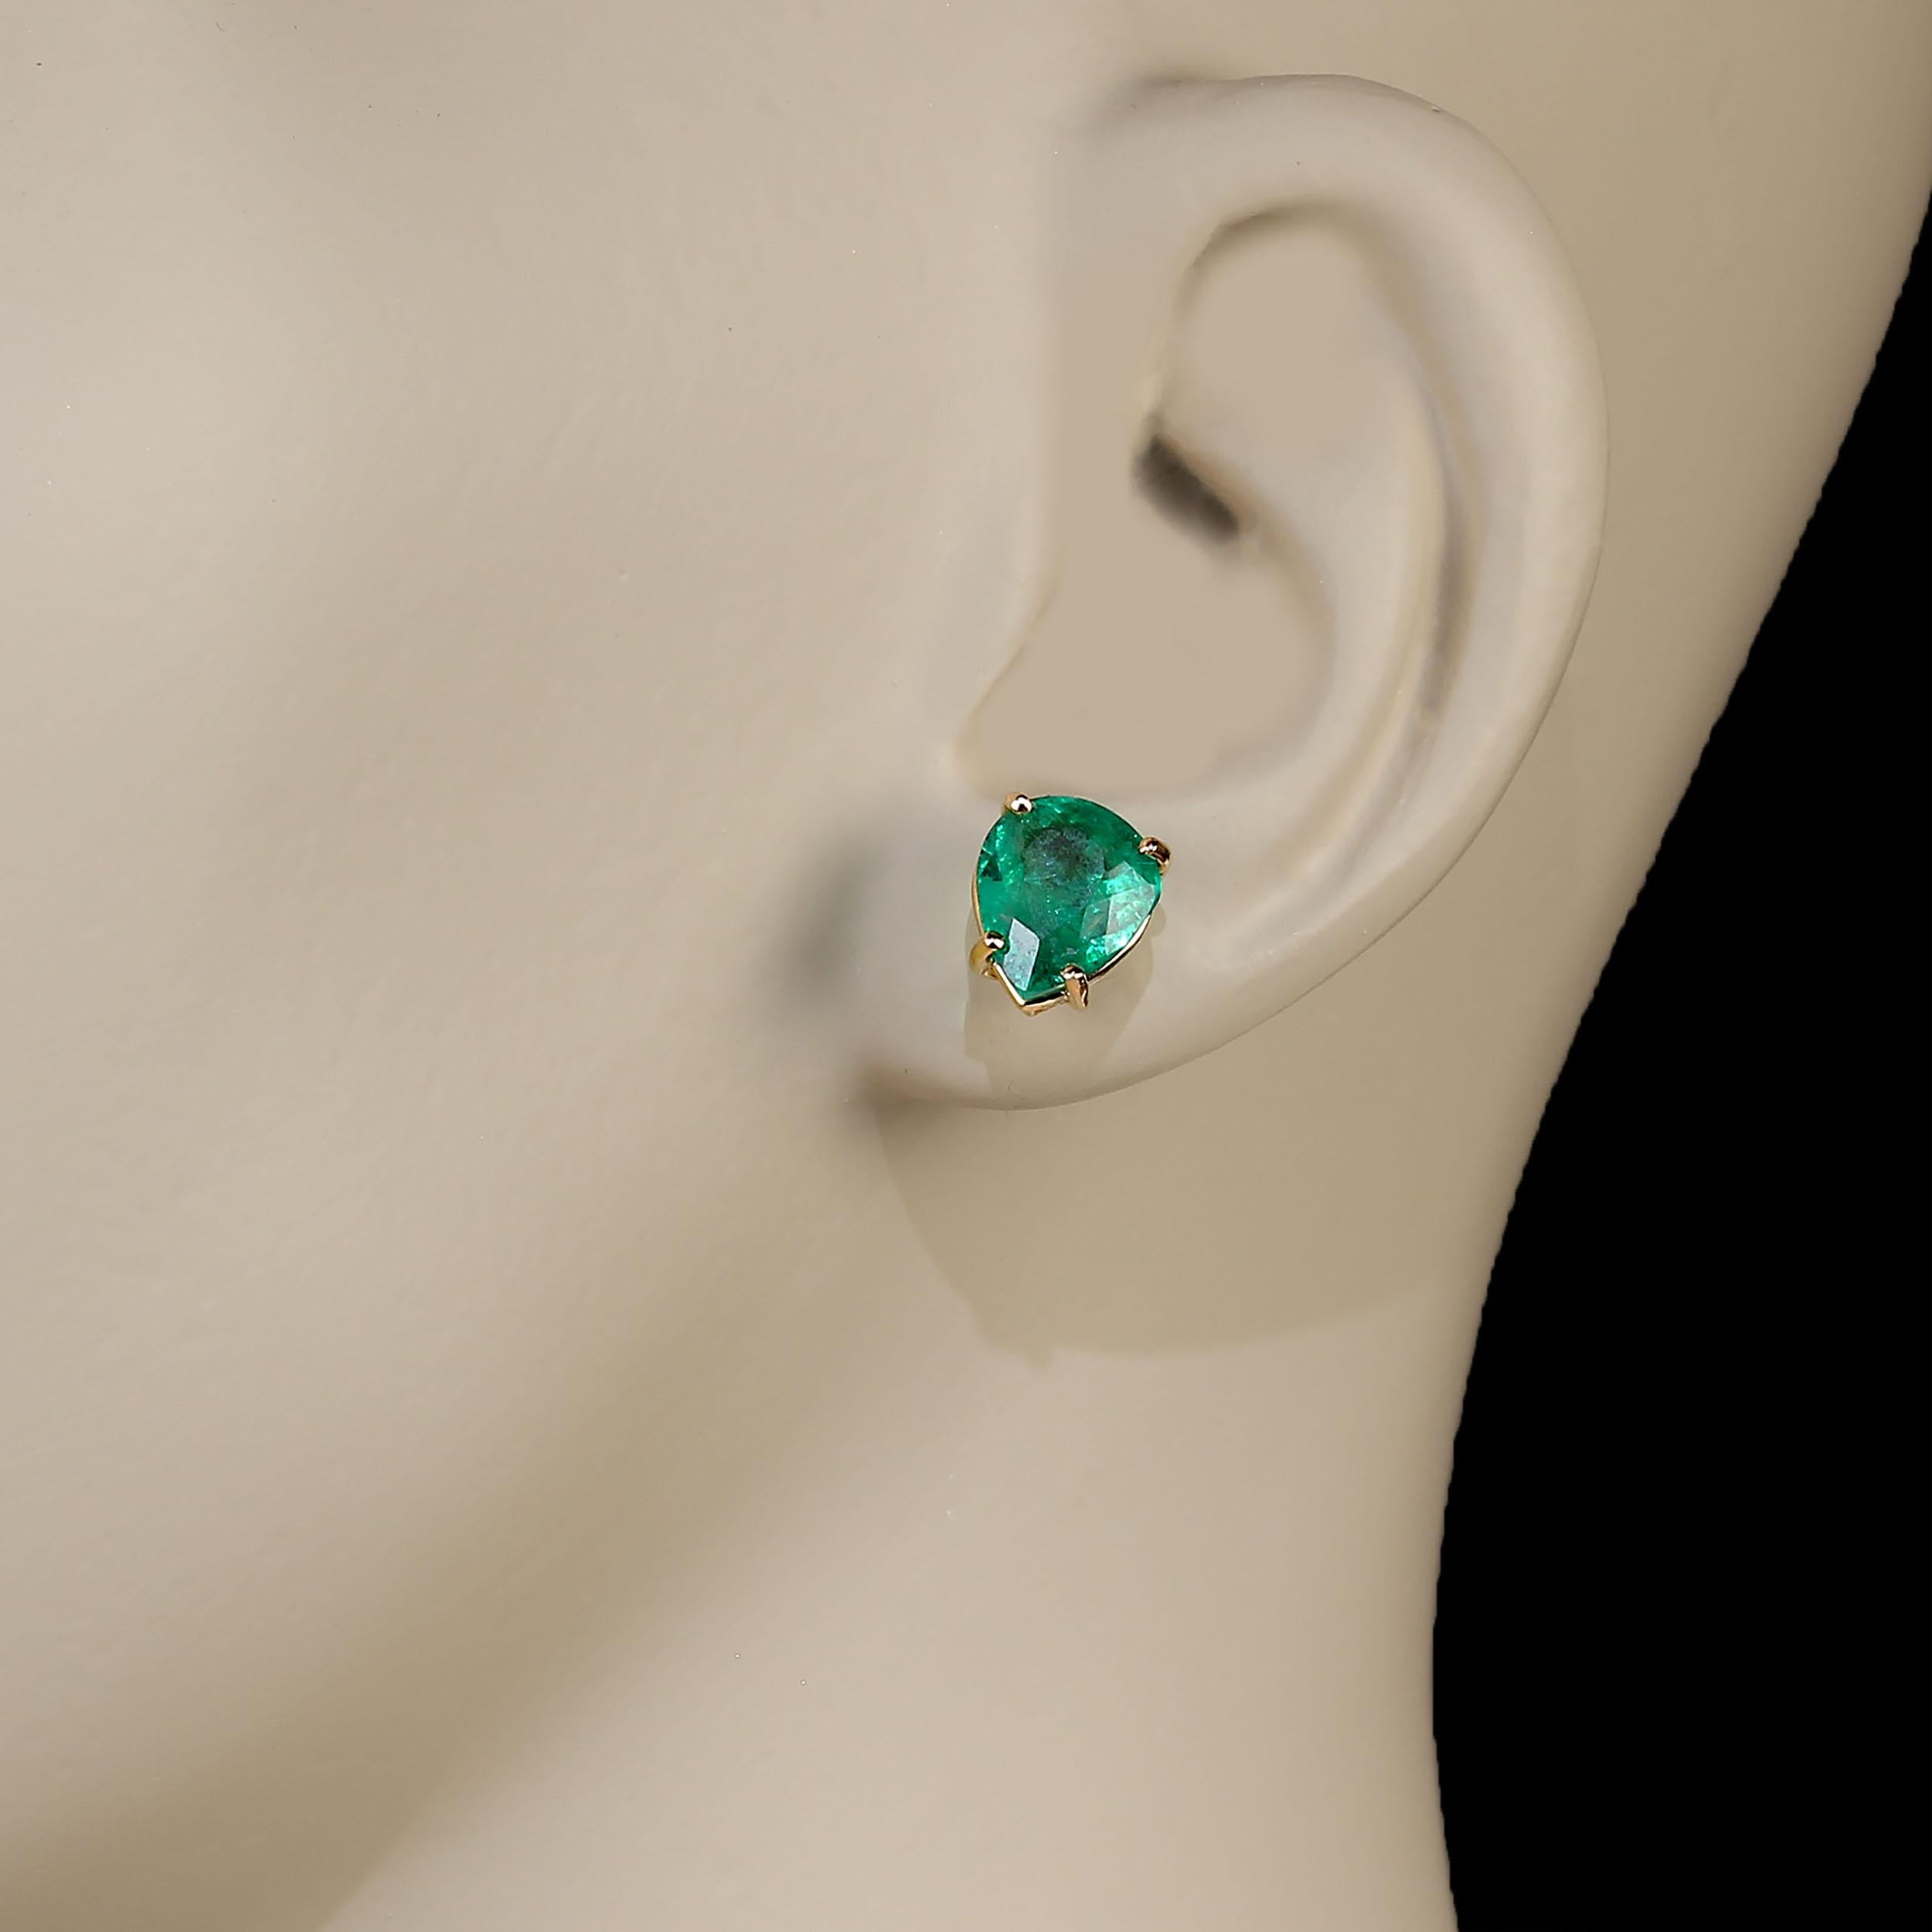 Incredibly elegant Emerald studs, 4.26ctw. These beautiful wide bodied pear shaped brazilian Emeralds are just gorgeous. They are approximately 10 x 8 MM and set in 18K rich yellow gold. Wear these beauties day and evening. ME2314